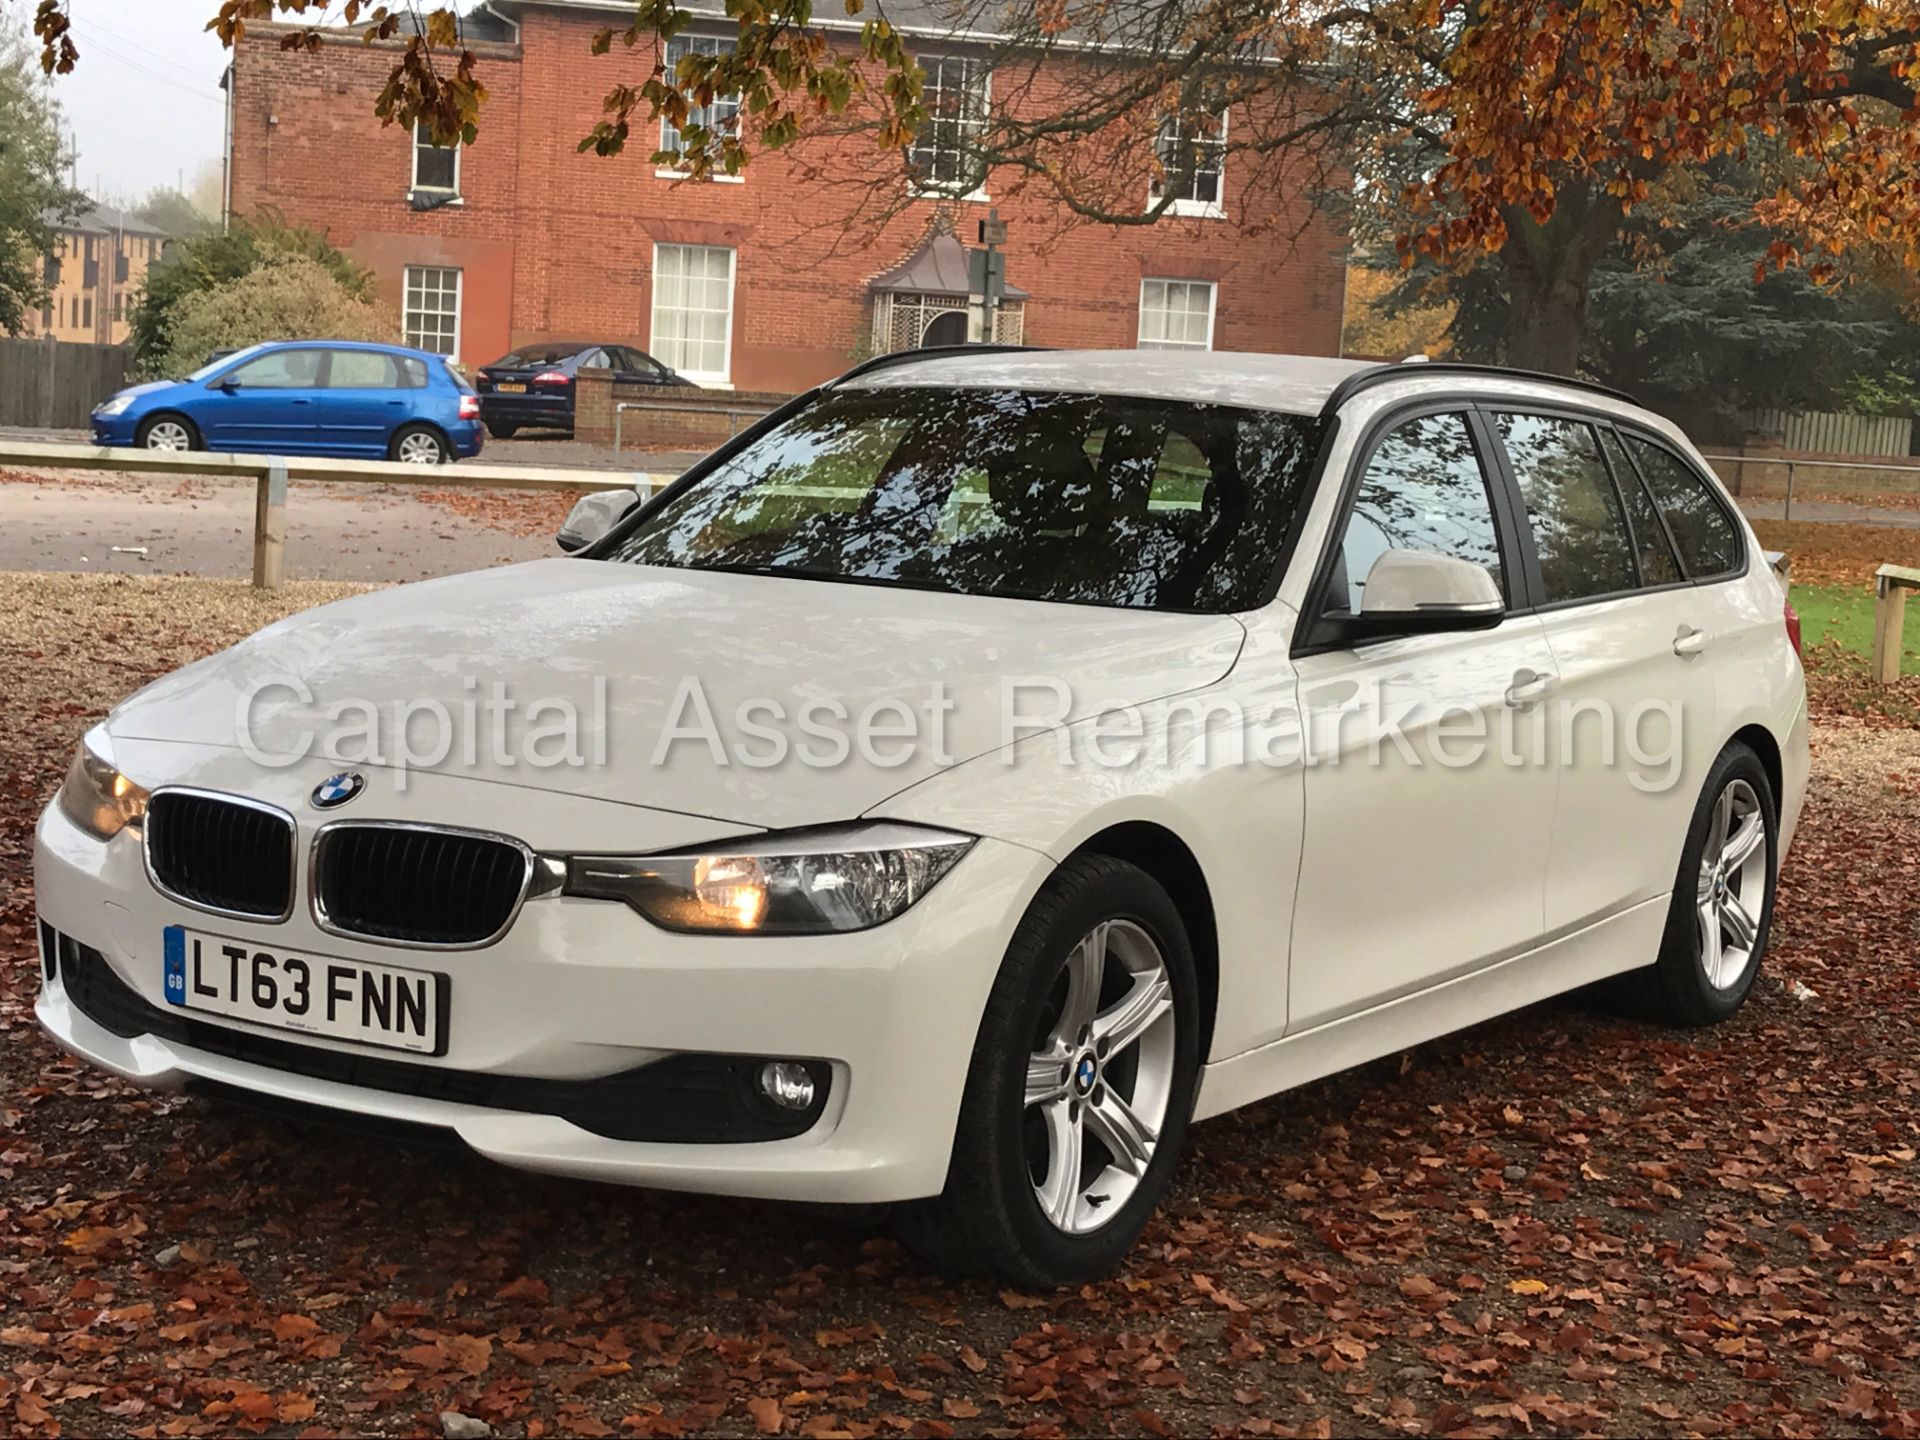 BMW 320d 'ESTATE / TOURING' (2014 MODEL) 8 SPEED AUTO - SAT NAV **FULLY LOADED** (1 OWNER FROM NEW) - Image 4 of 25